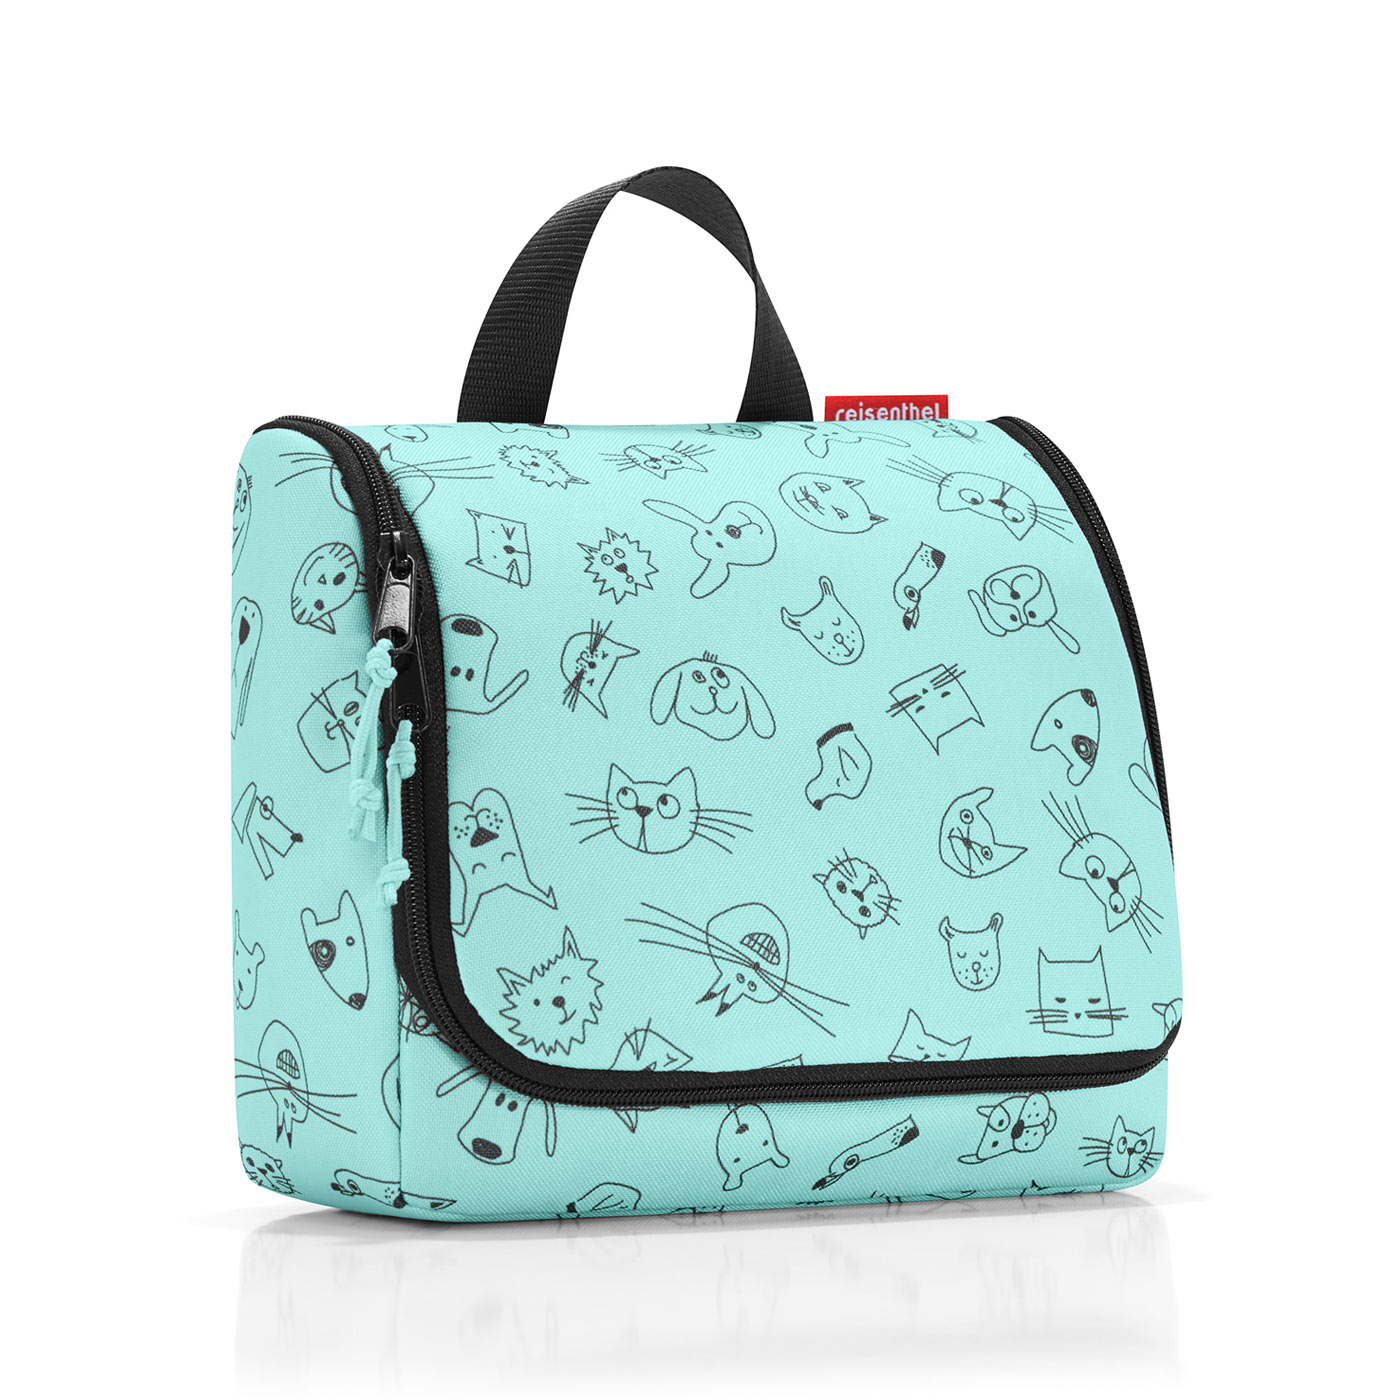 E-shop Reisenthel Toiletbag Kids Cats and dogs mint